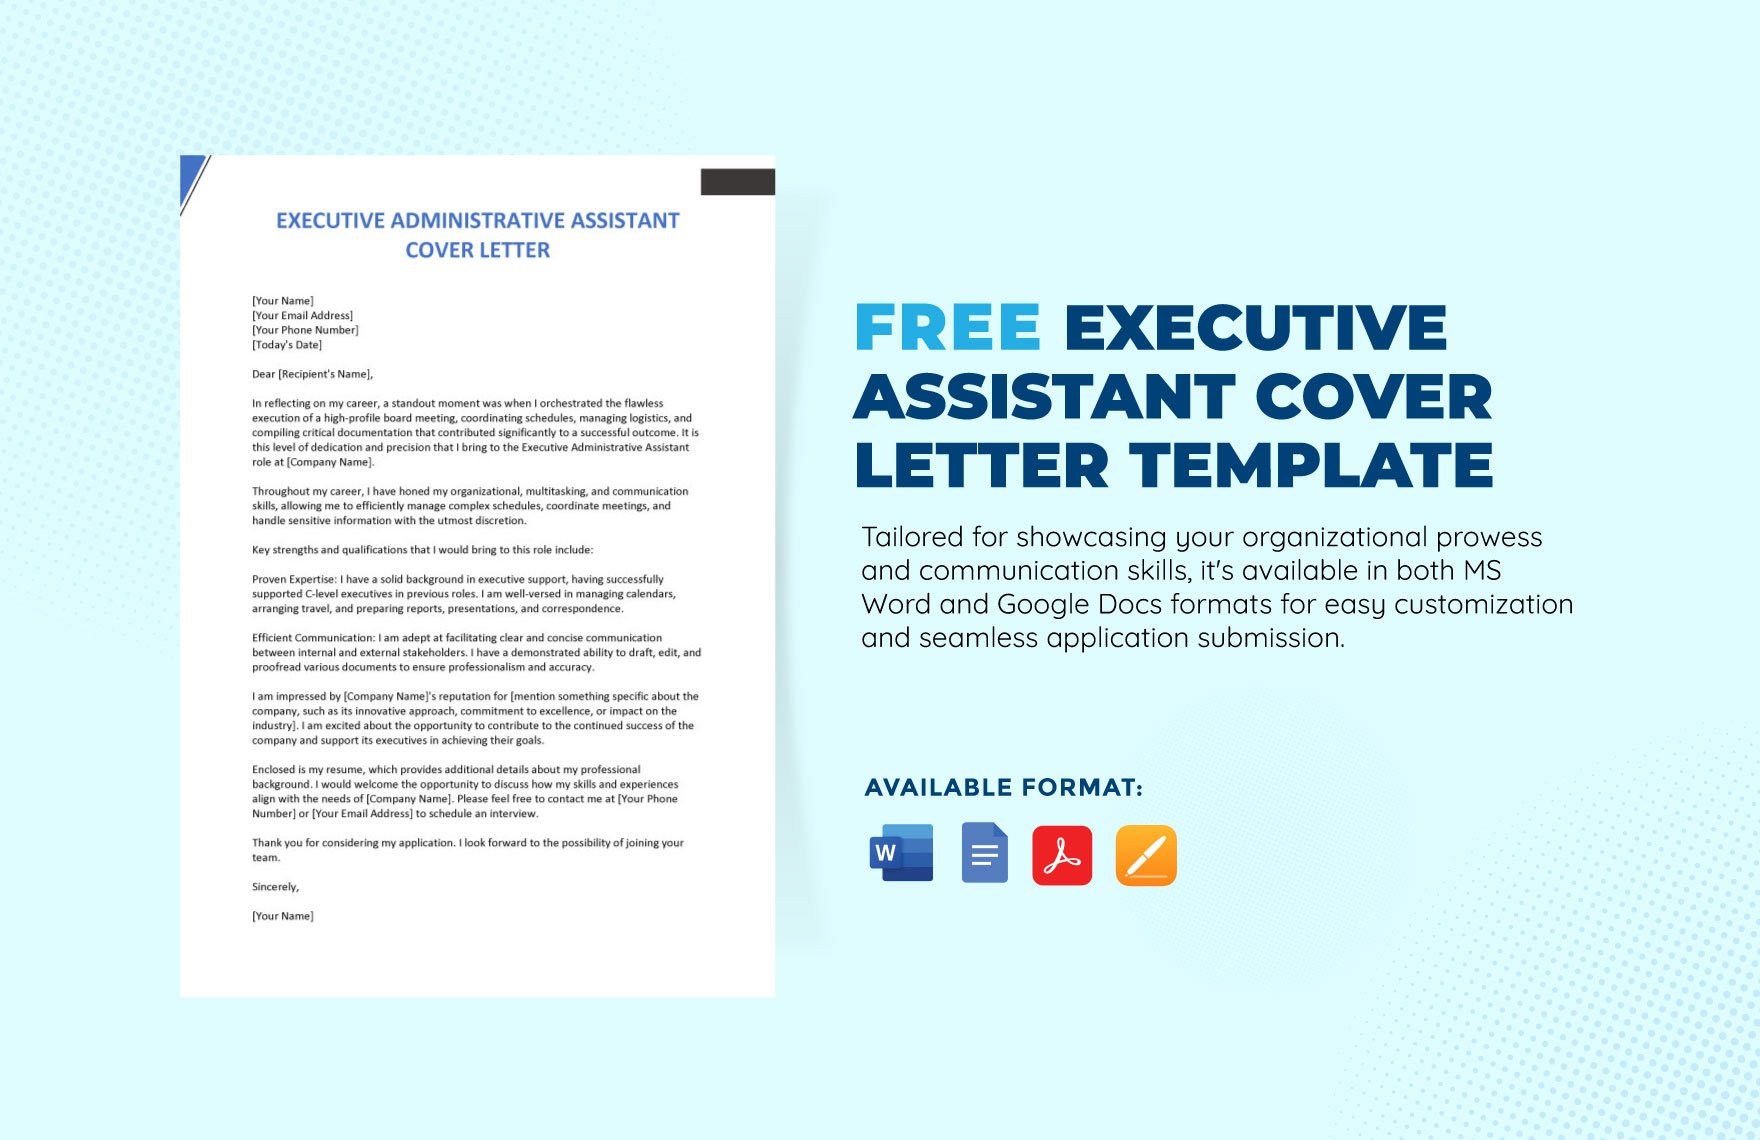 Executive Administrative Assistant Cover Letter